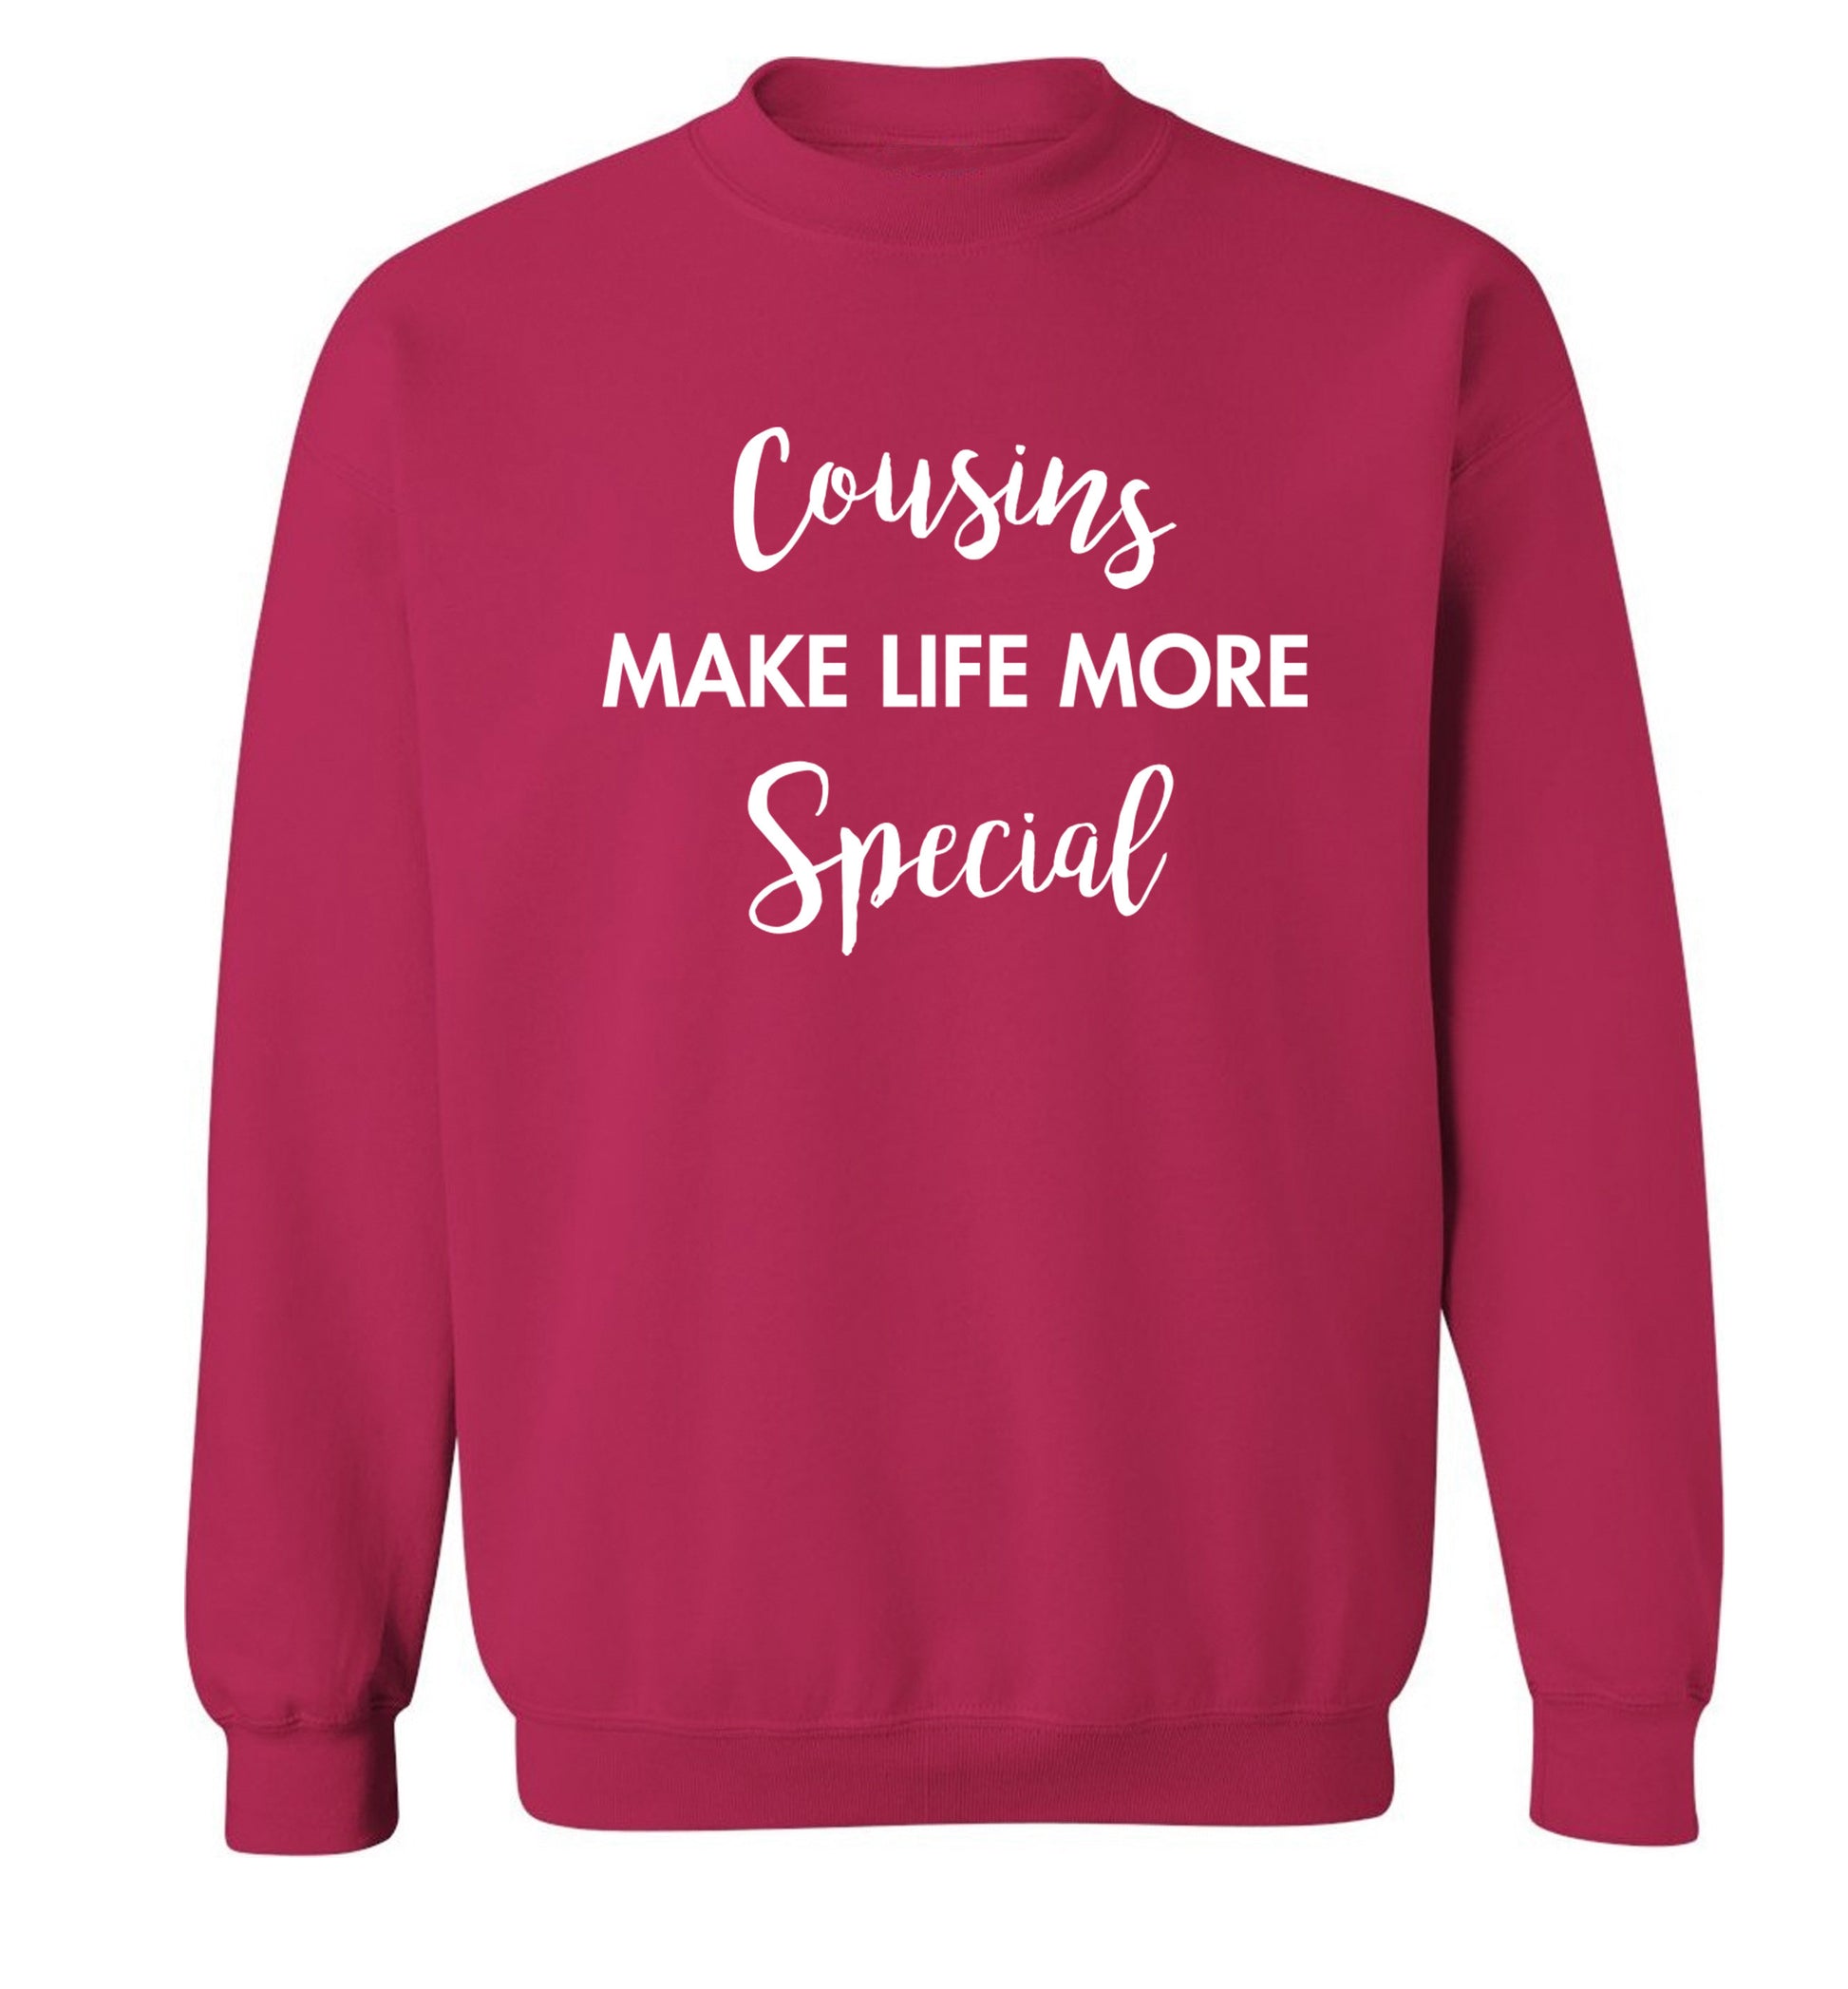 Cousins make life more special Adult's unisex pink Sweater 2XL